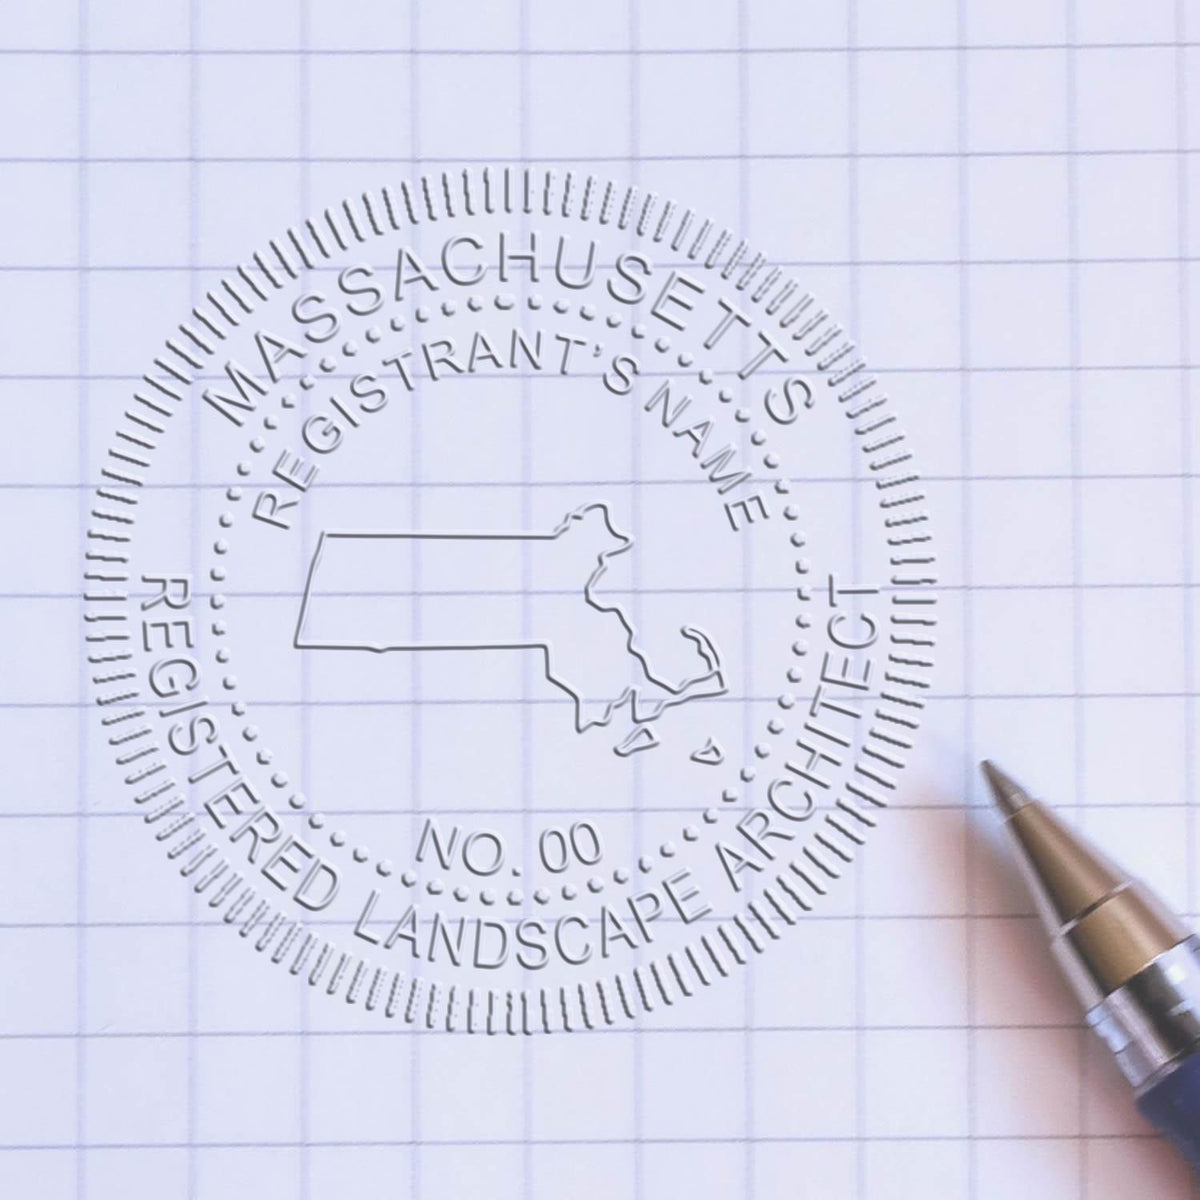 A photograph of the Hybrid Massachusetts Landscape Architect Seal stamp impression reveals a vivid, professional image of the on paper.